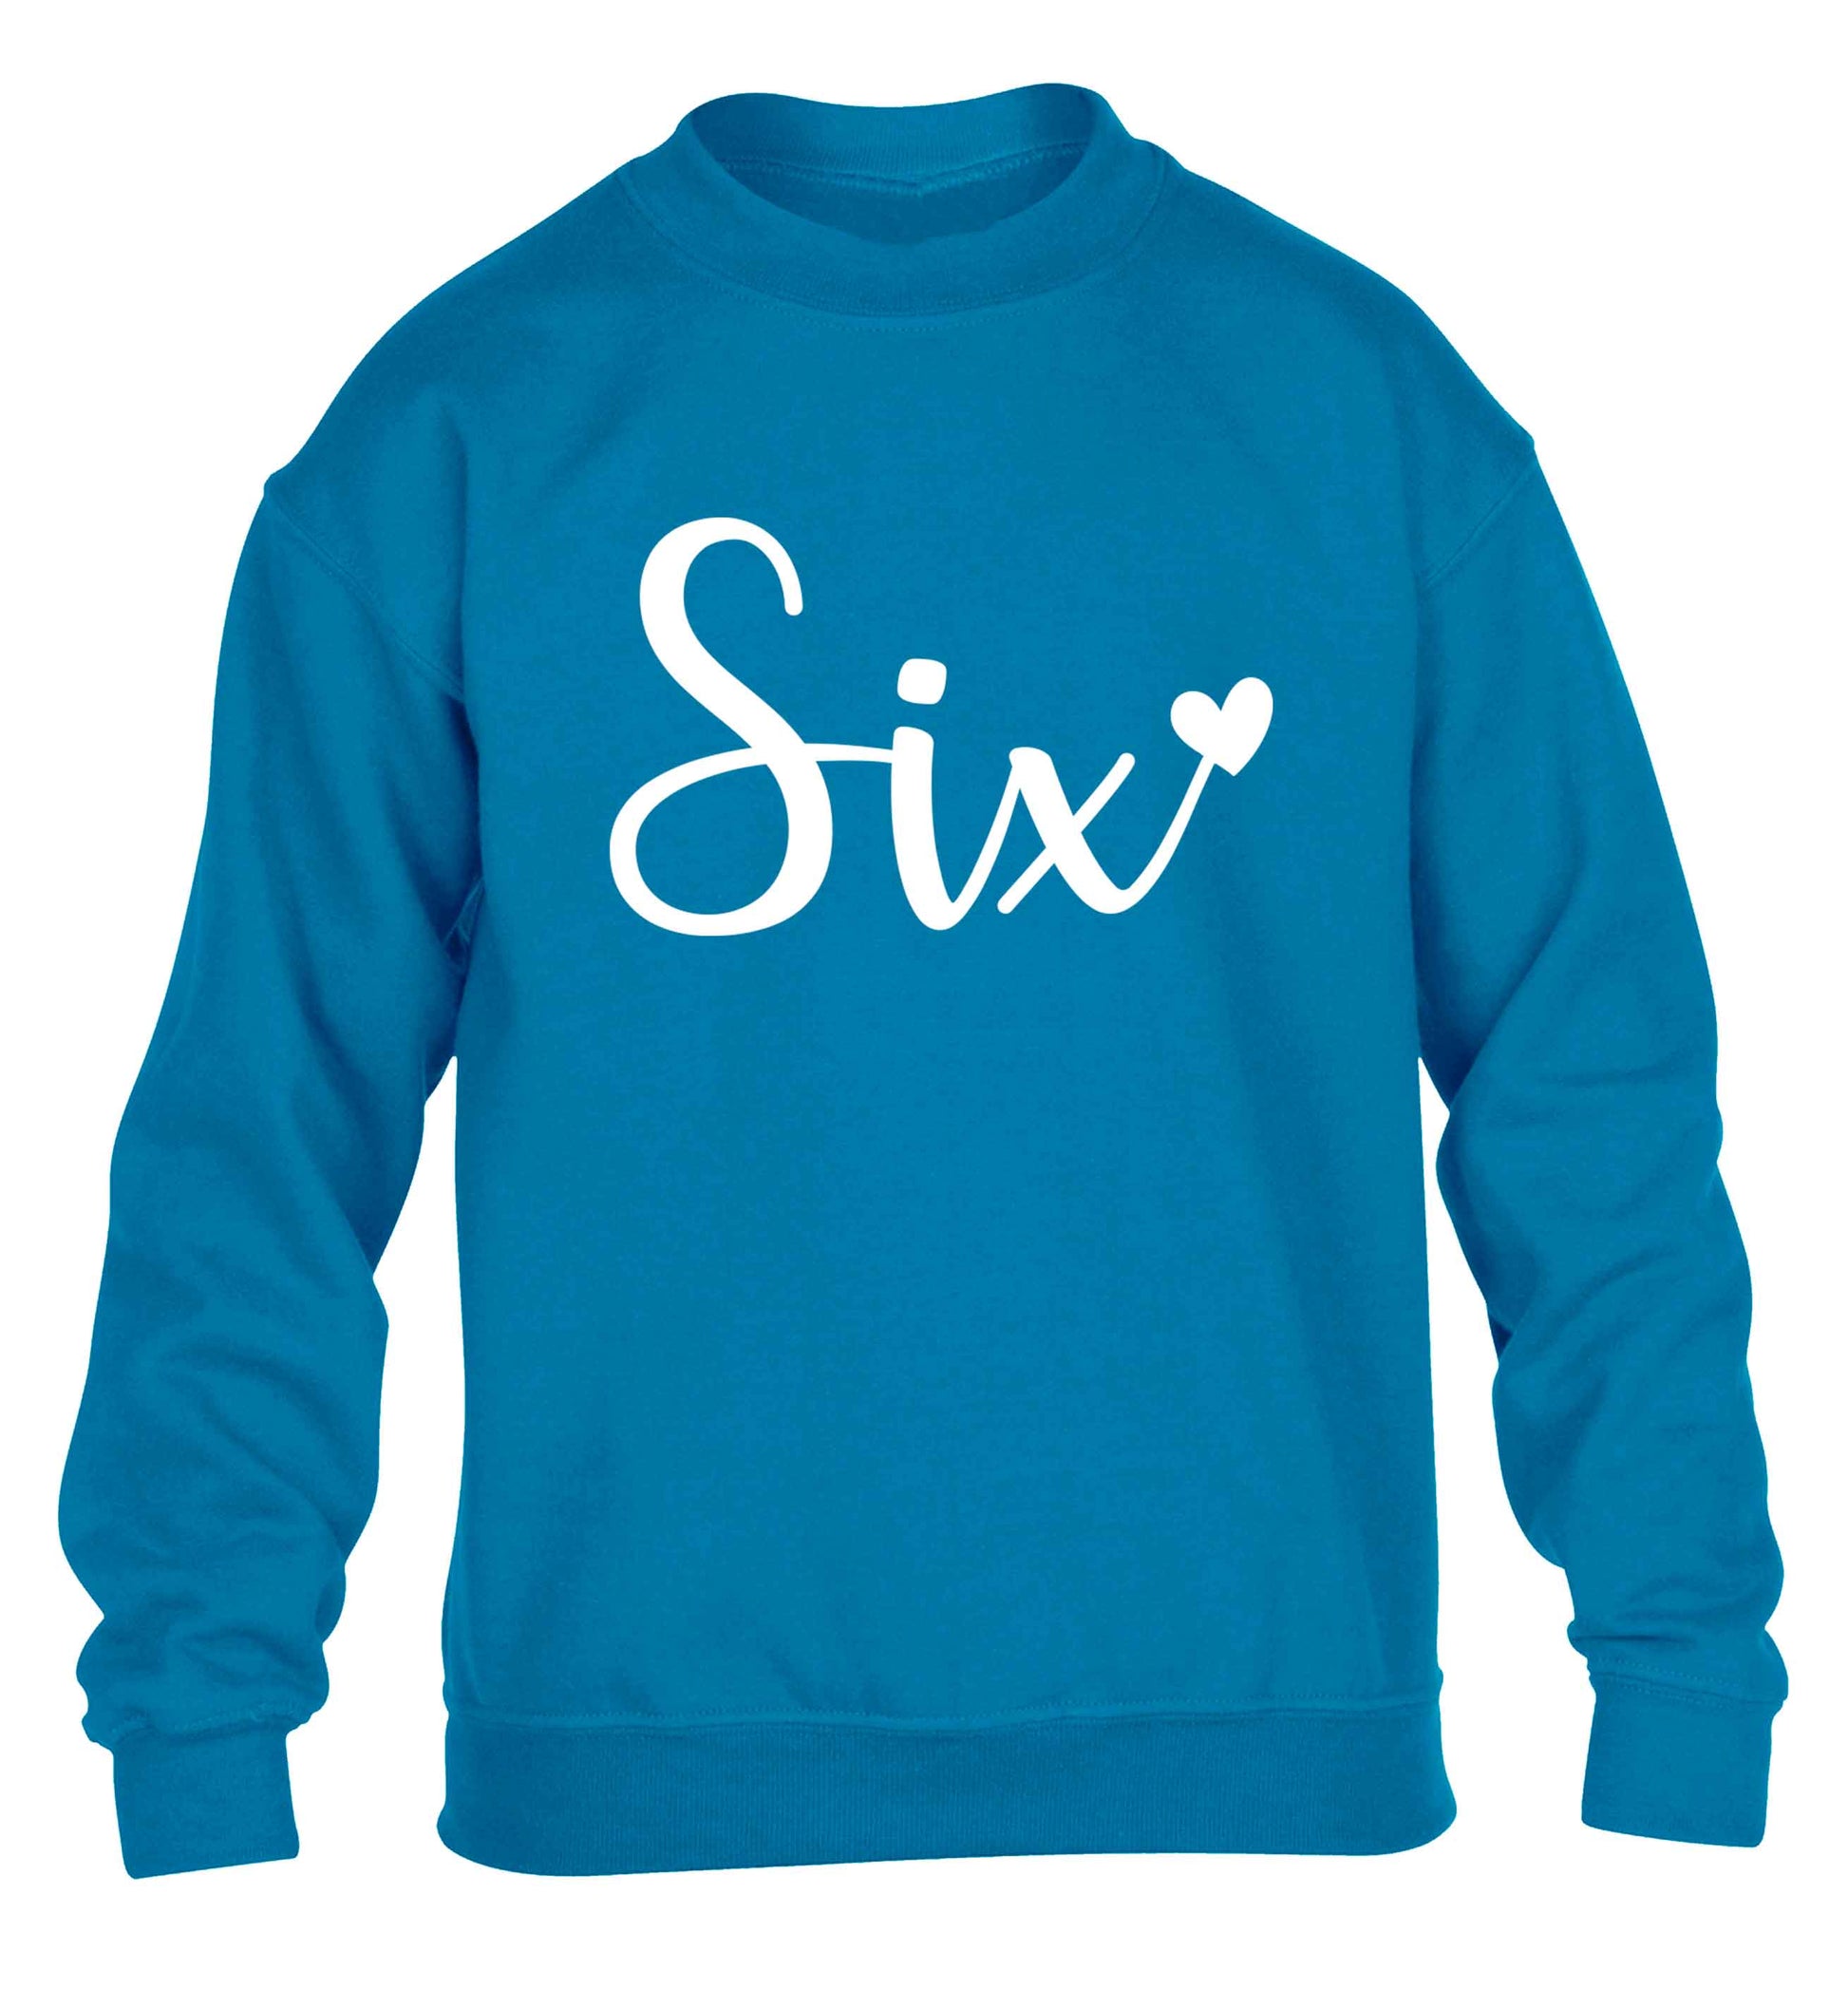 Six and heart! children's blue sweater 12-13 Years